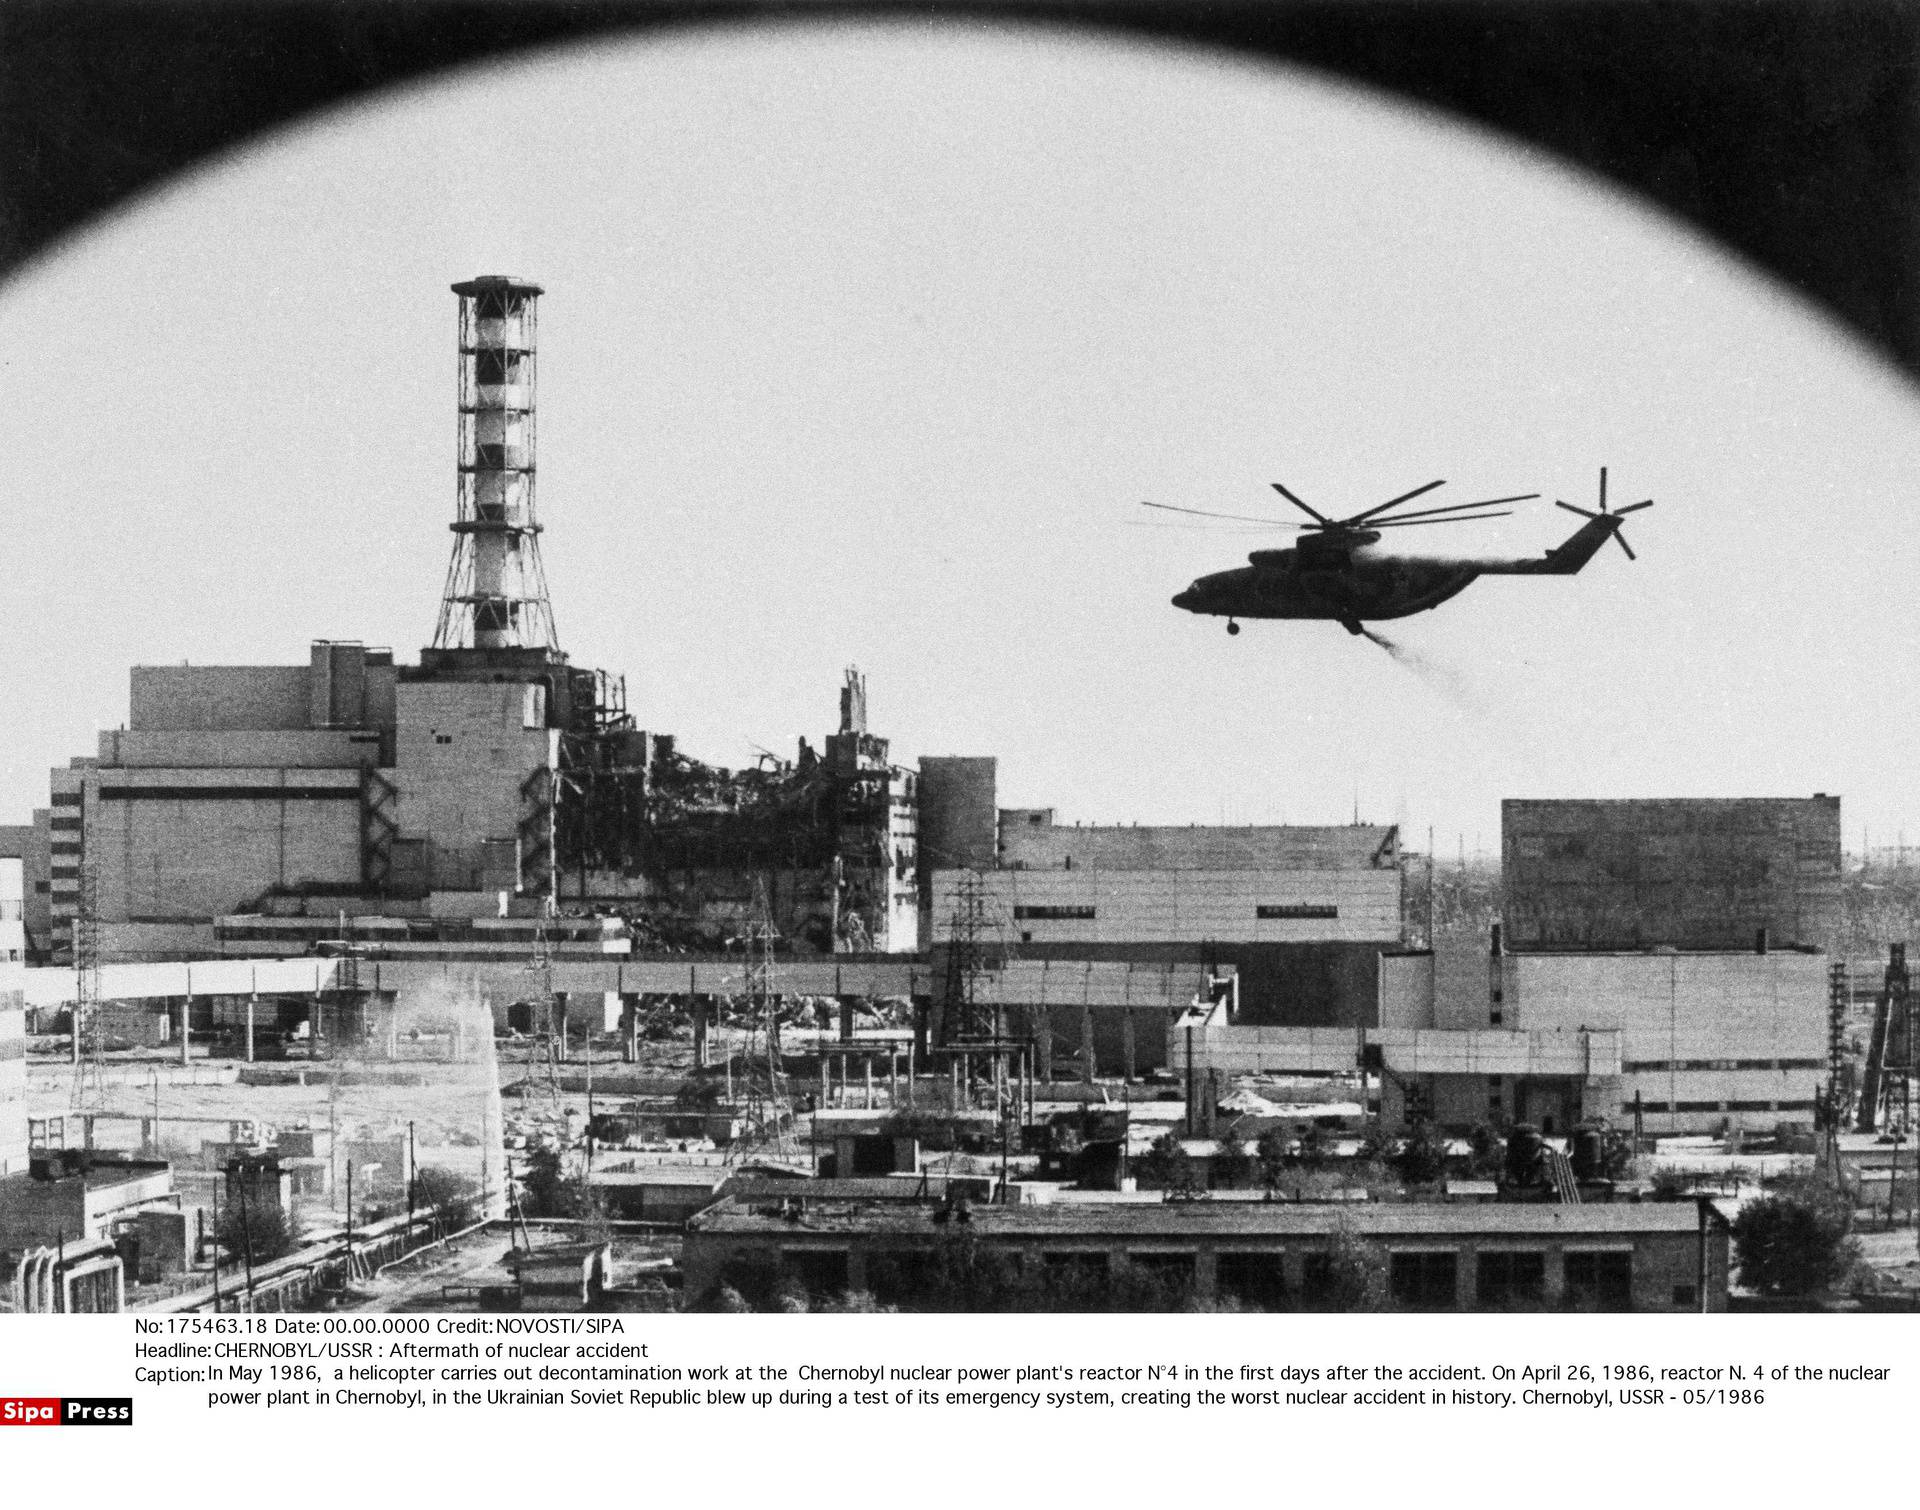 CHERNOBYL/USSR : Aftermath of nuclear accident